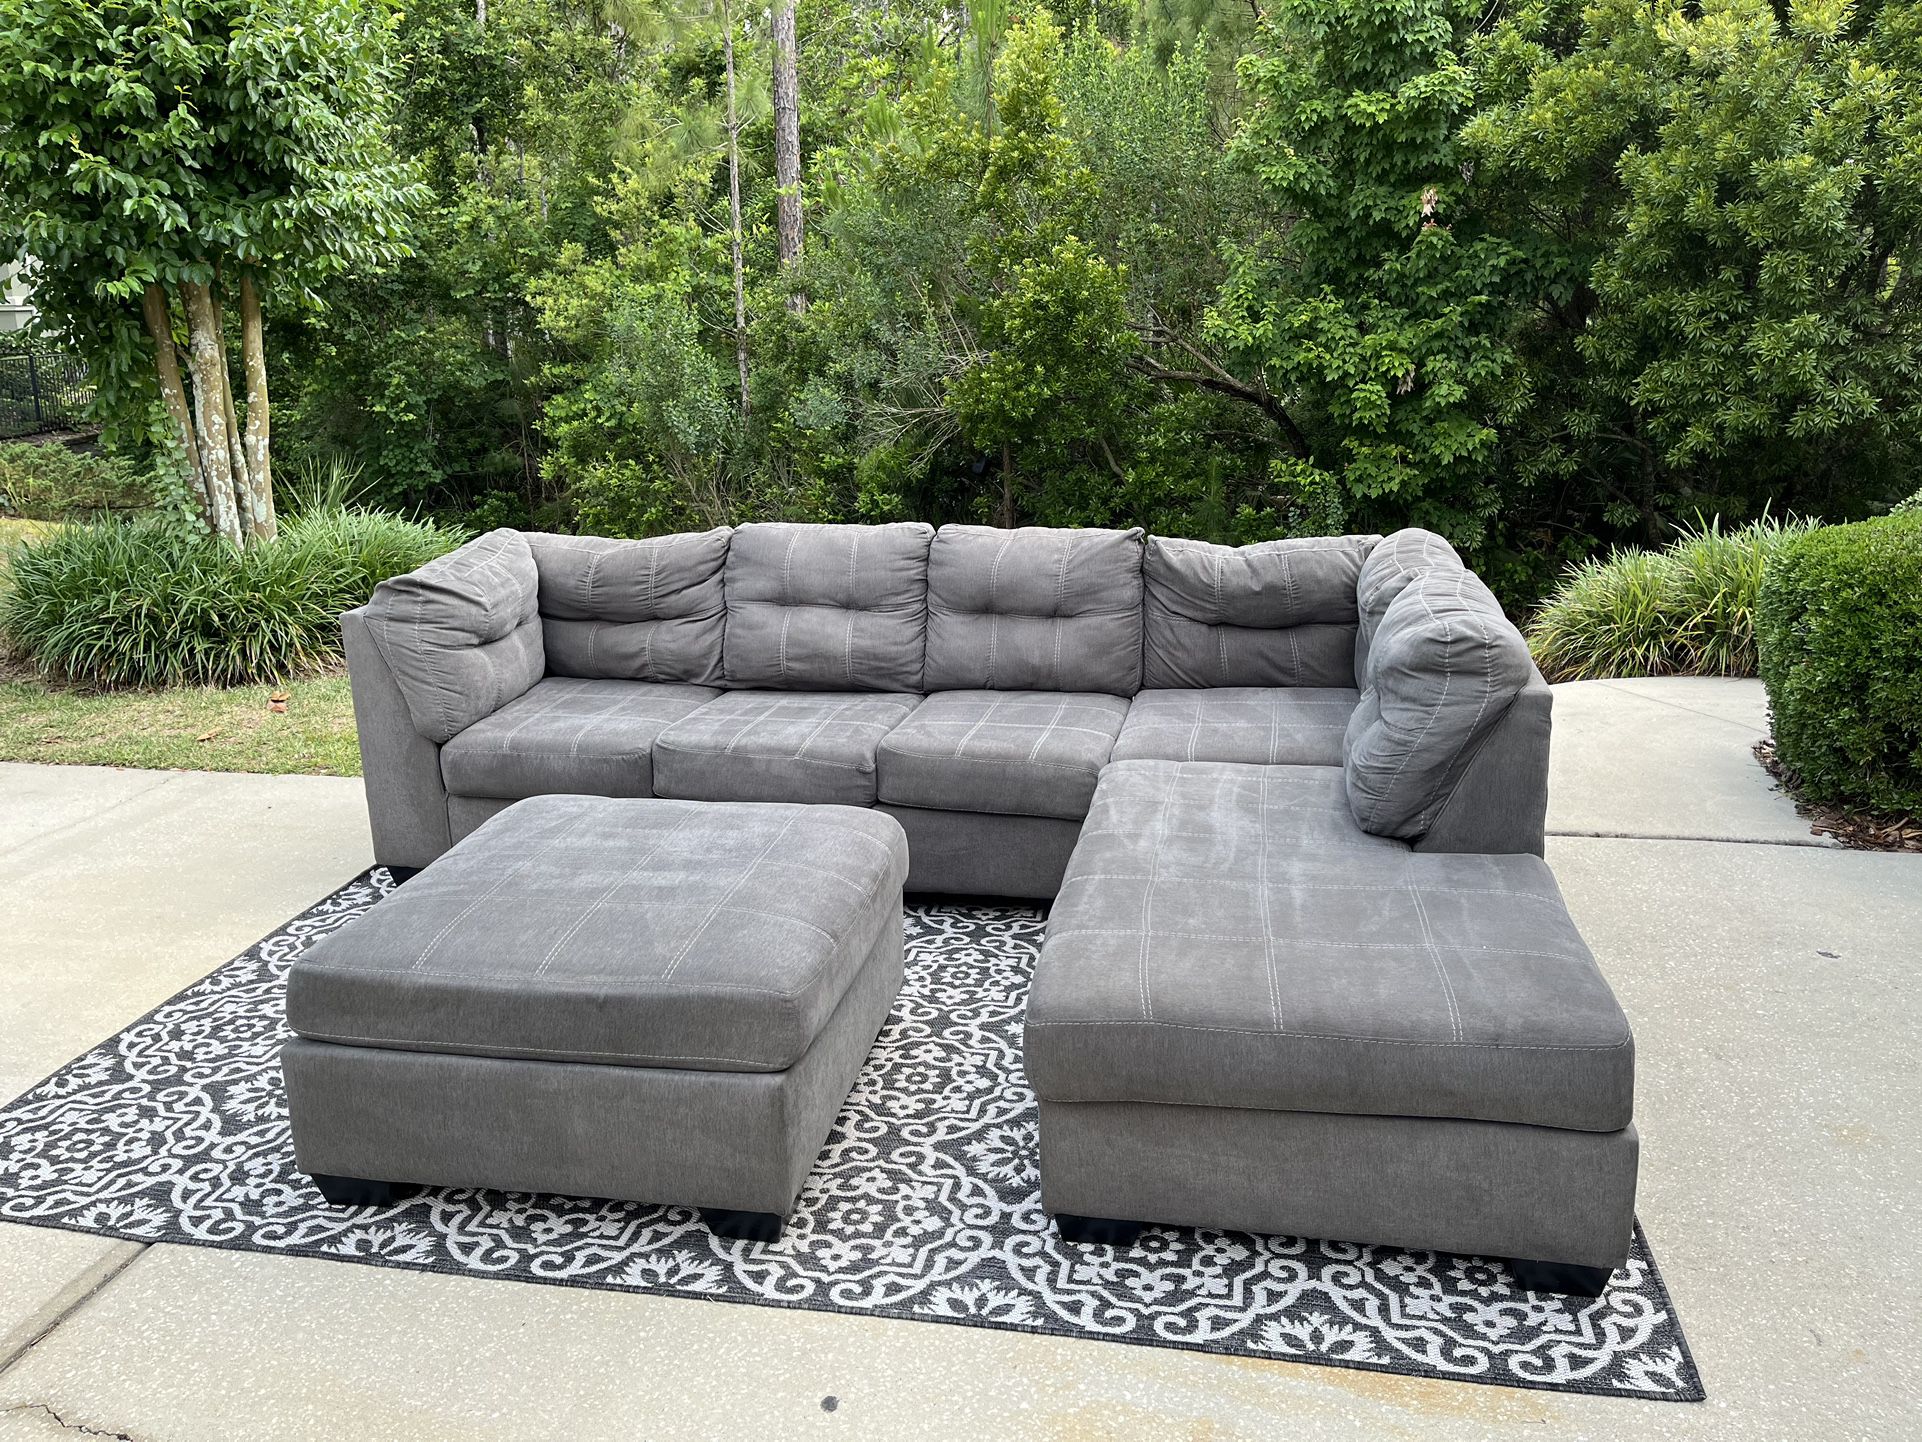 Free Delivery & Install! Comfortable Gray 2 Piece Ashley Furniture Sectional Couch Sofa With Ottoman